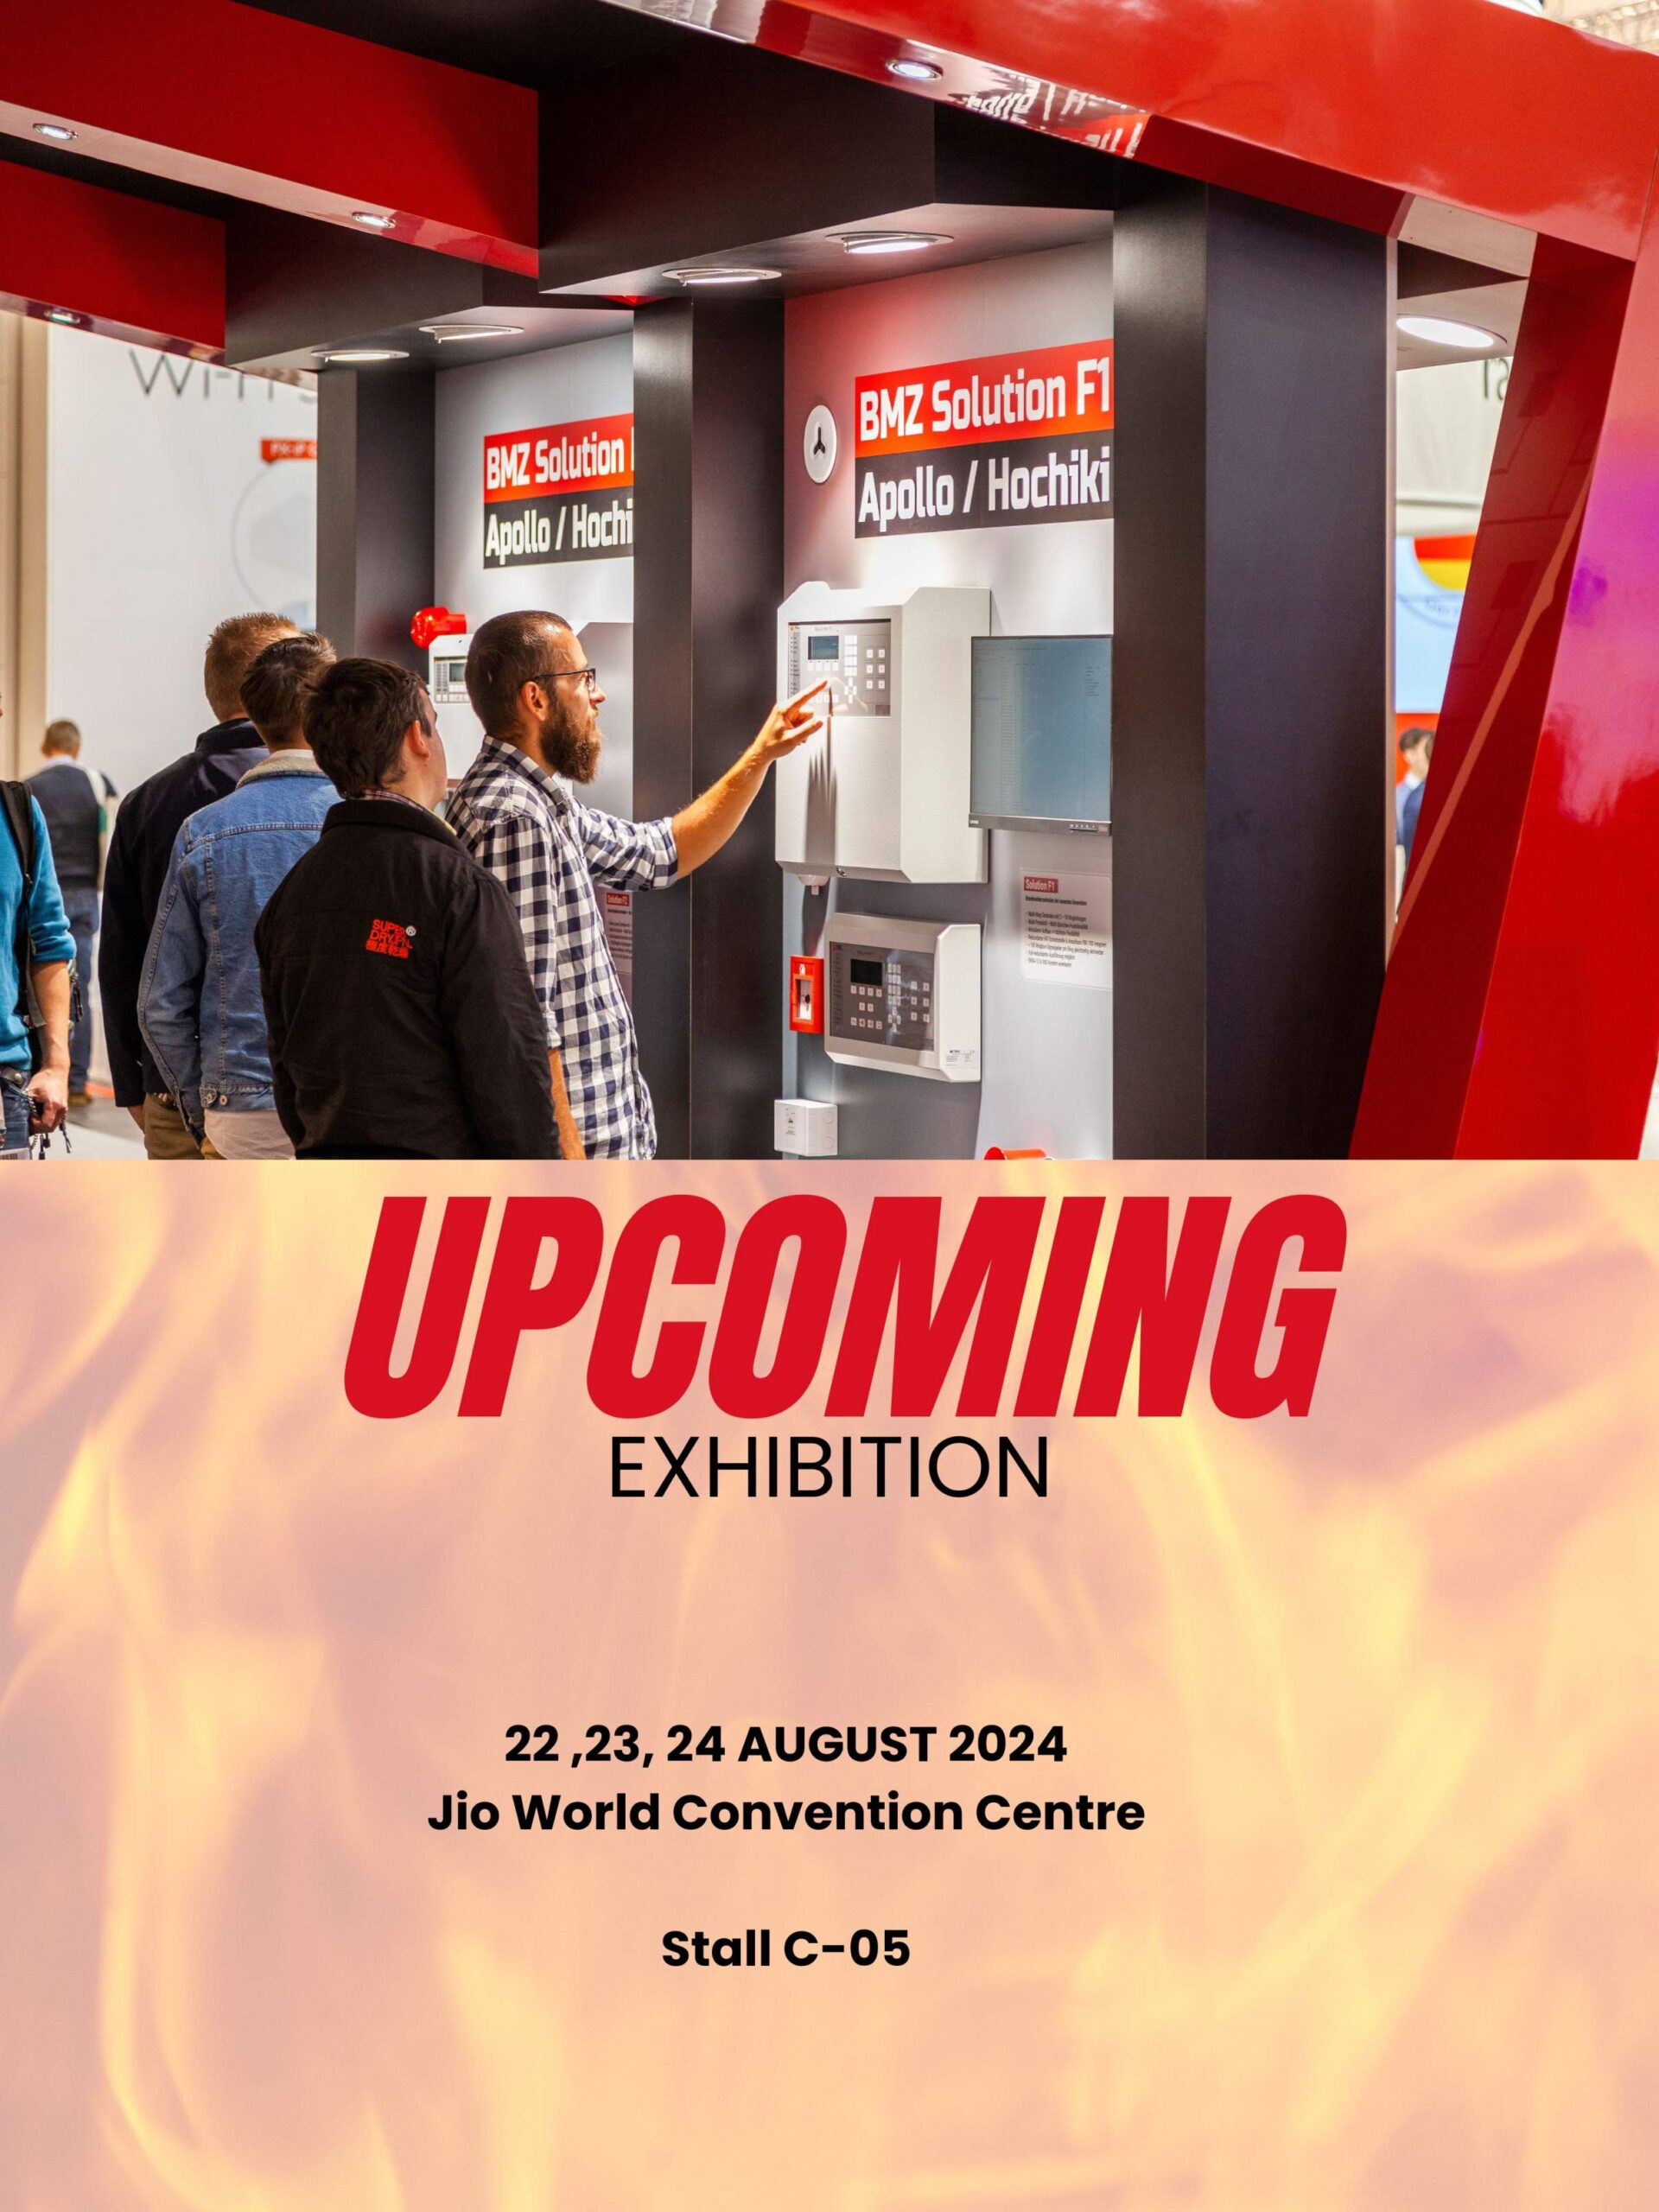 Discover the Future of Fire Safety at FSIE’s Upcoming Exhibition with Us!